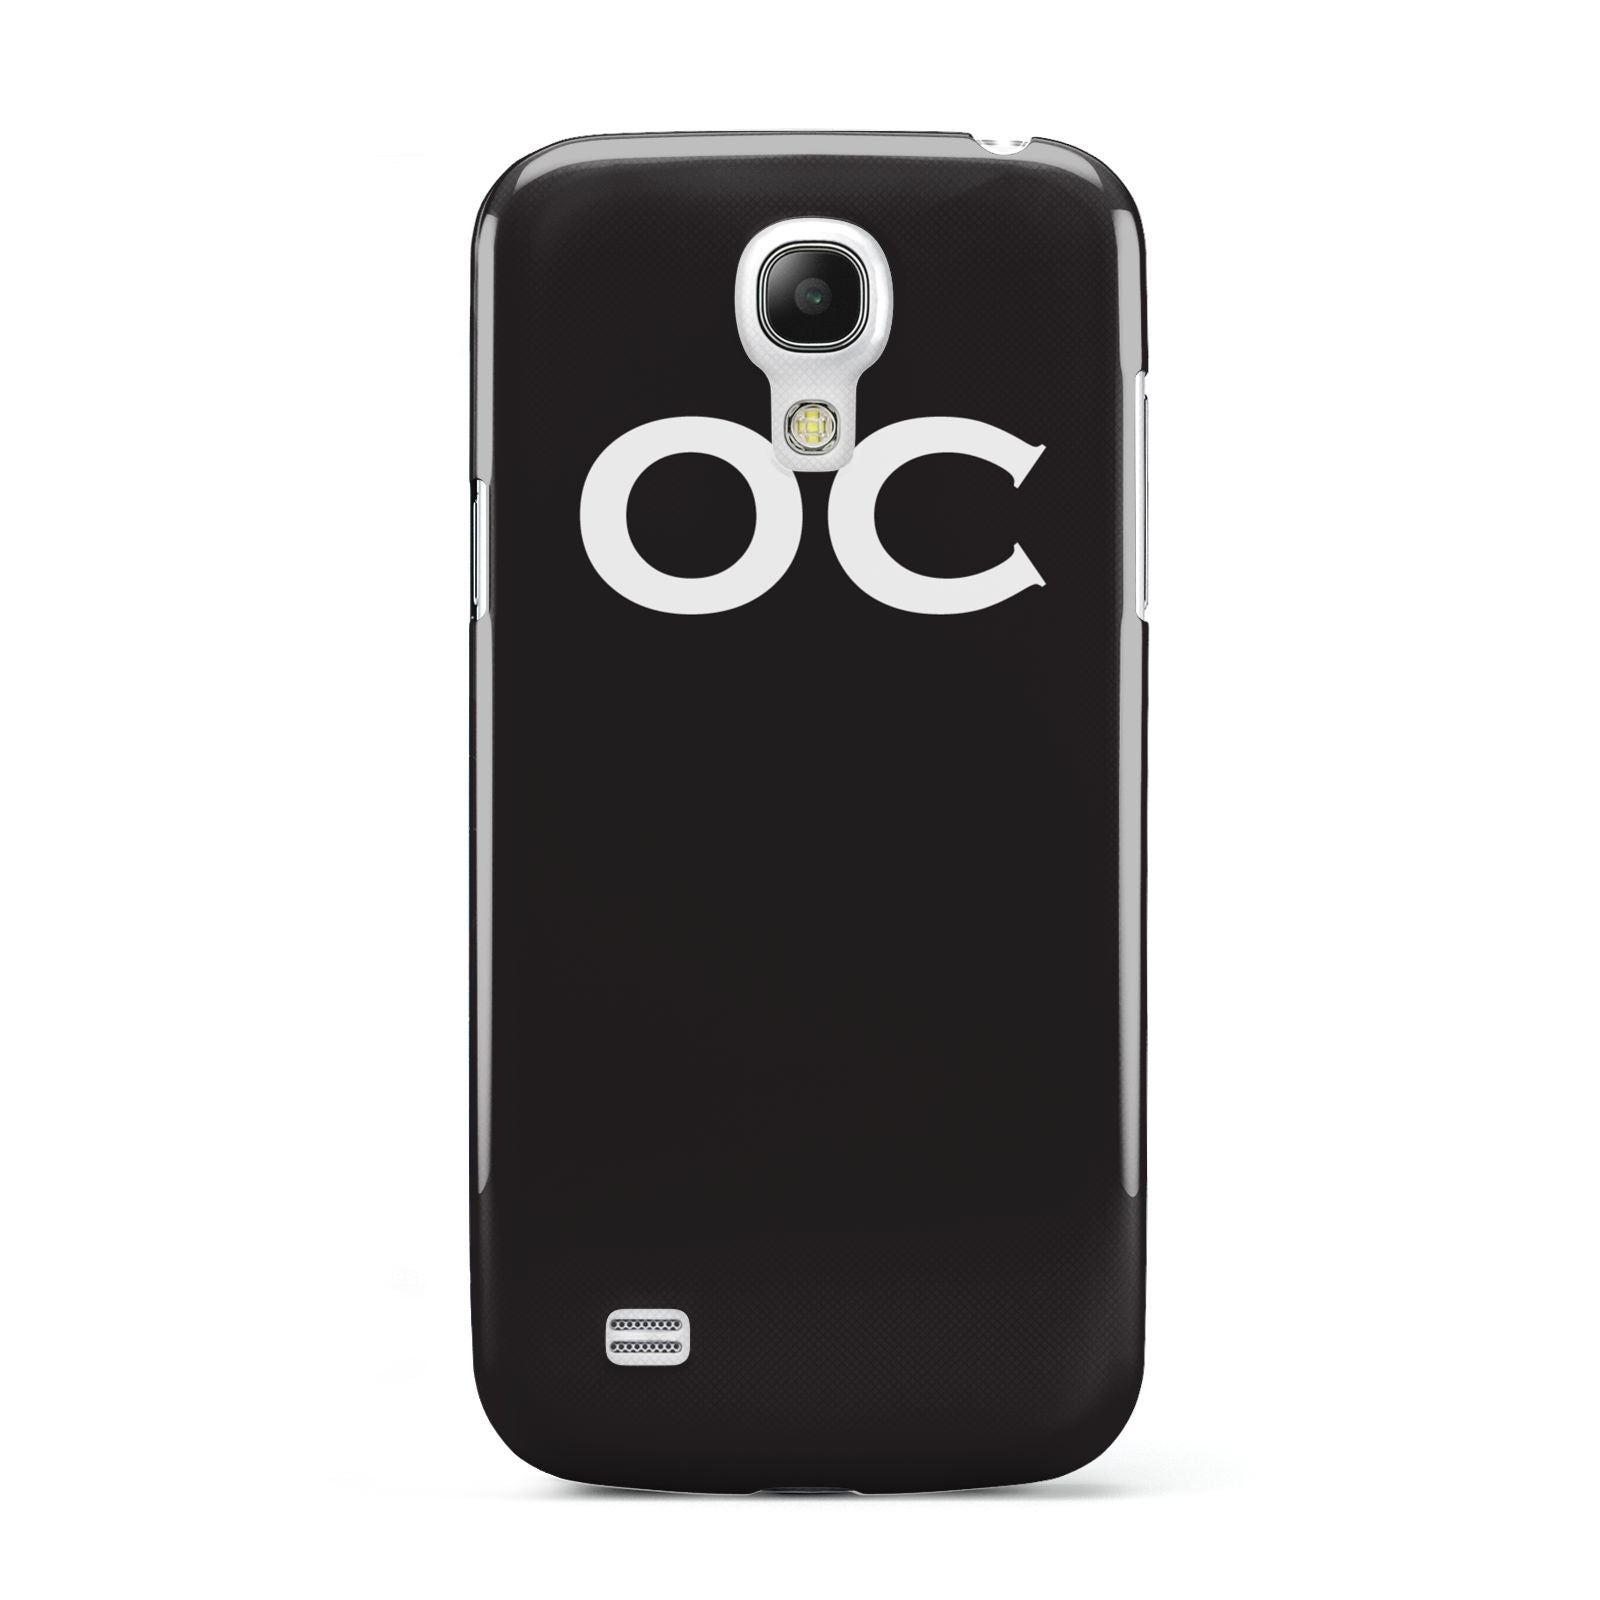 Personalised Black with Initials Samsung Galaxy S4 Mini Case